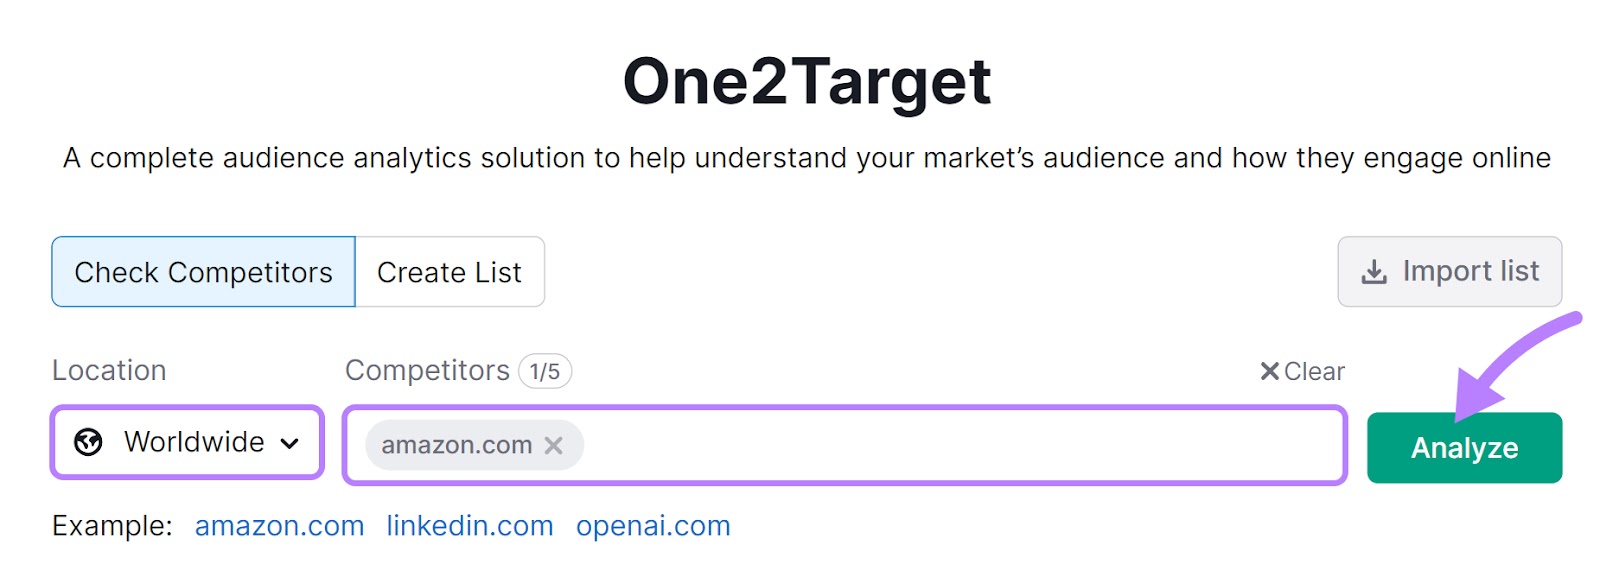 "amazon.com" entered into the One2Target tool